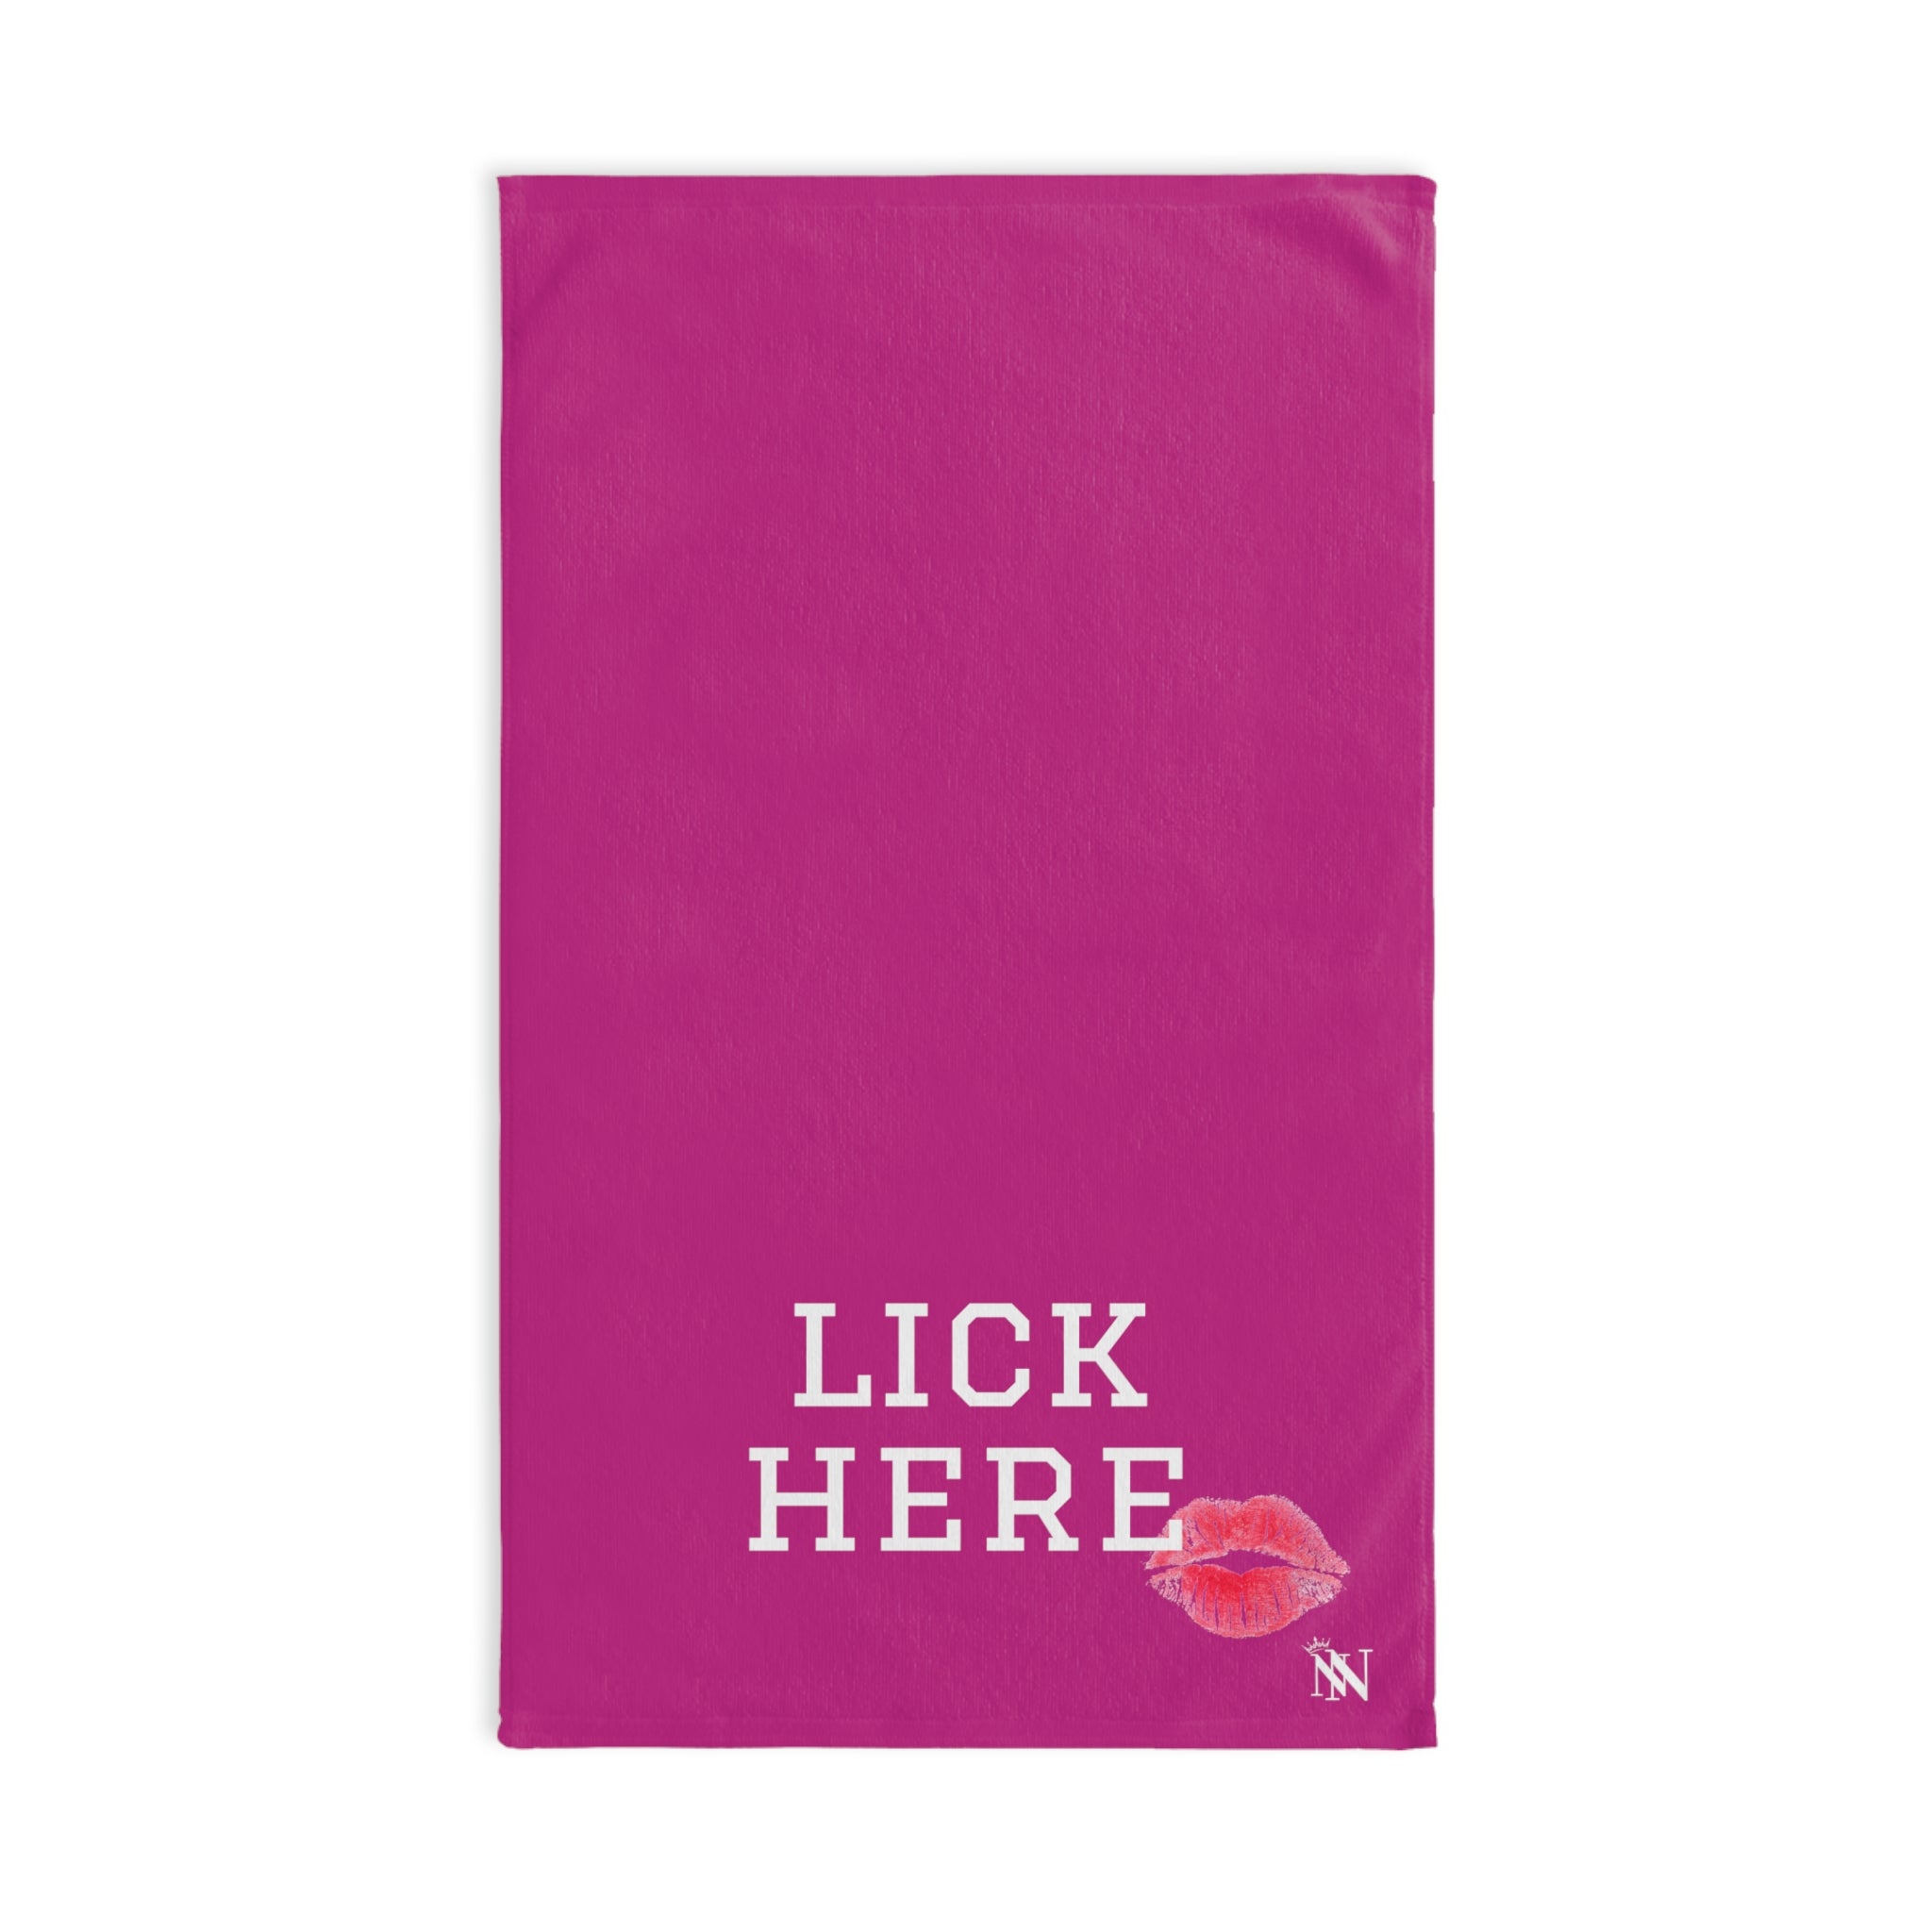 Lick Here KissingFuscia | Funny Gifts for Men - Gifts for Him - Birthday Gifts for Men, Him, Husband, Boyfriend, New Couple Gifts, Fathers & Valentines Day Gifts, Hand Towels NECTAR NAPKINS